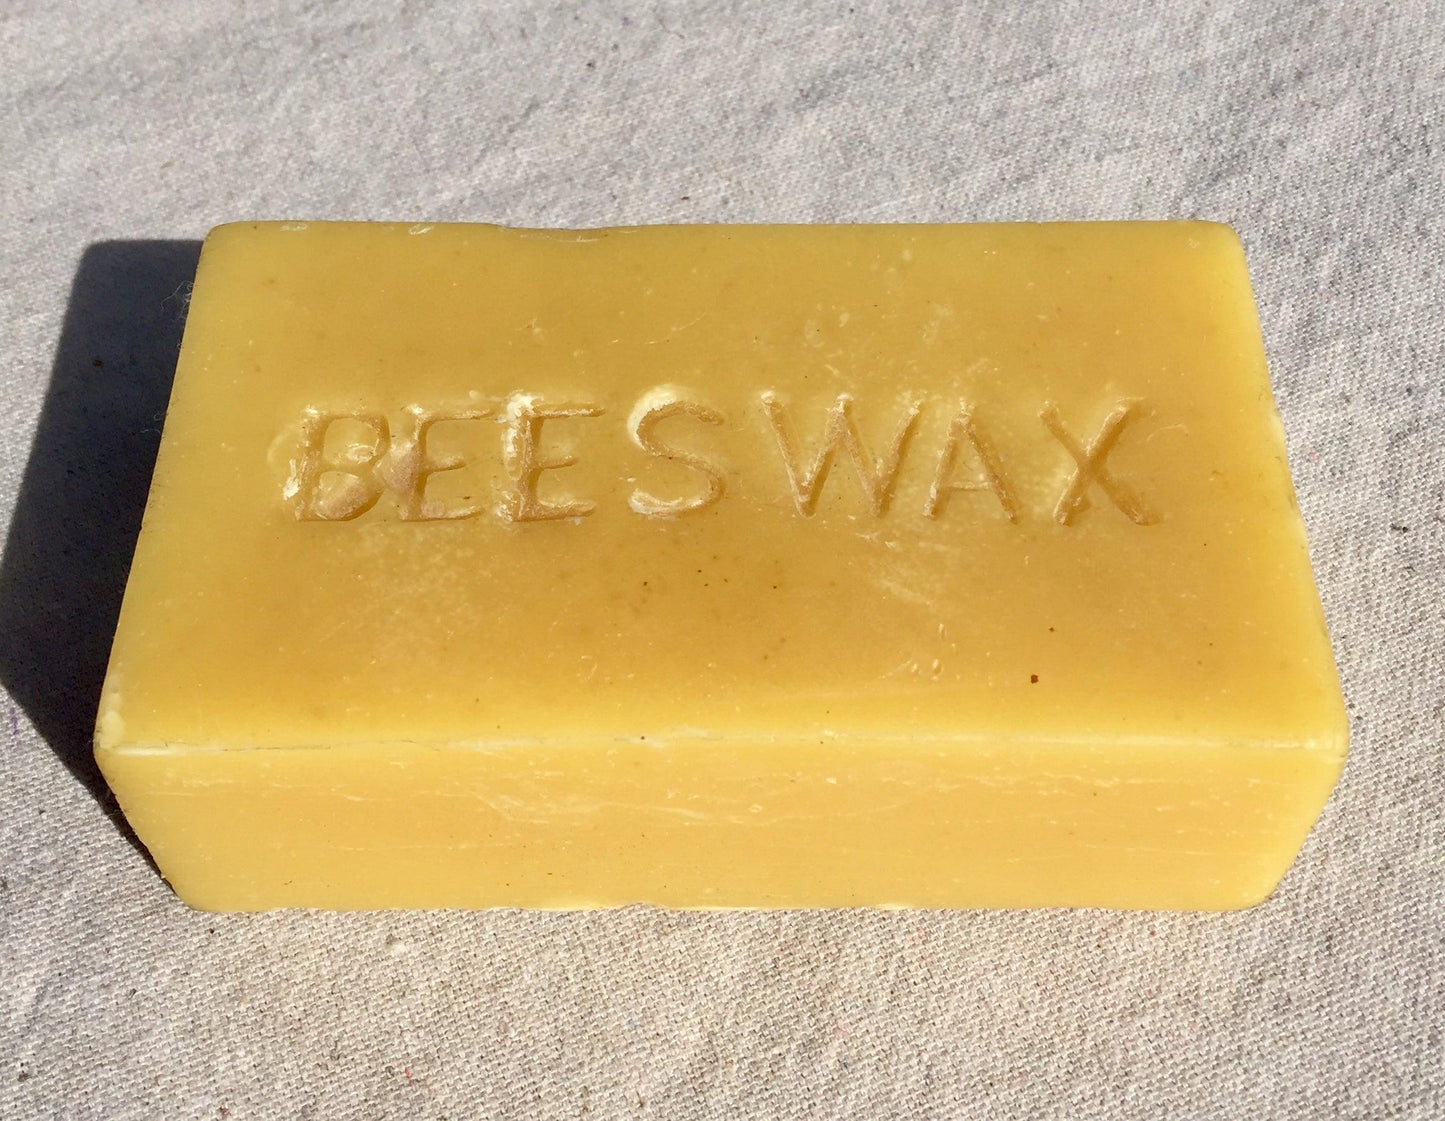 Cappings Beeswax - 1 lb. Block - Bee Squared Apiaries